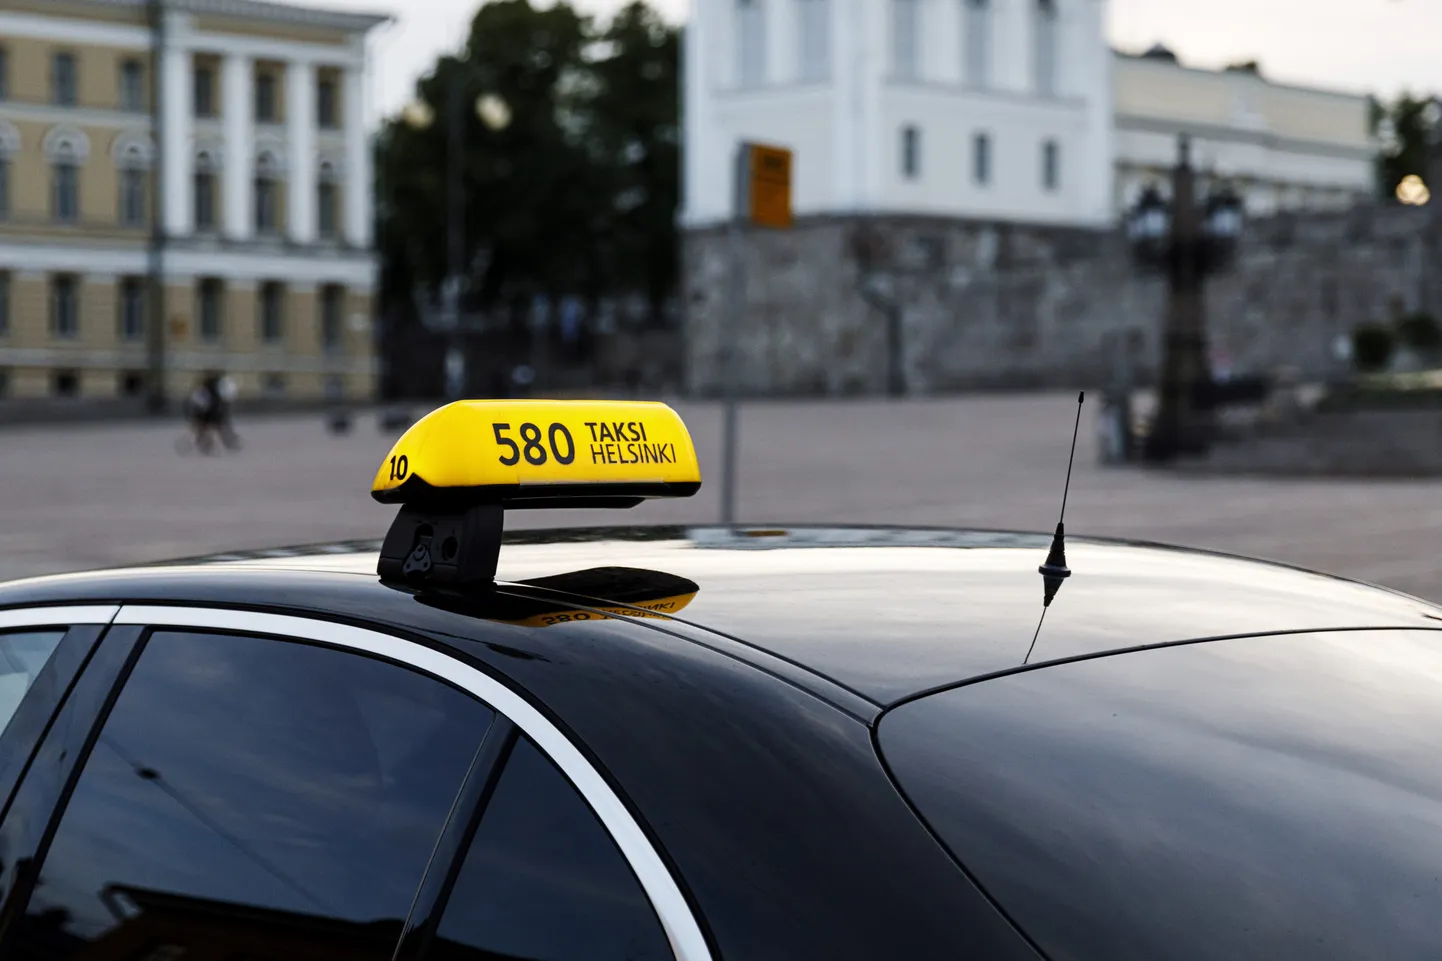 A taxi is seen in the Helsinki Senate Square